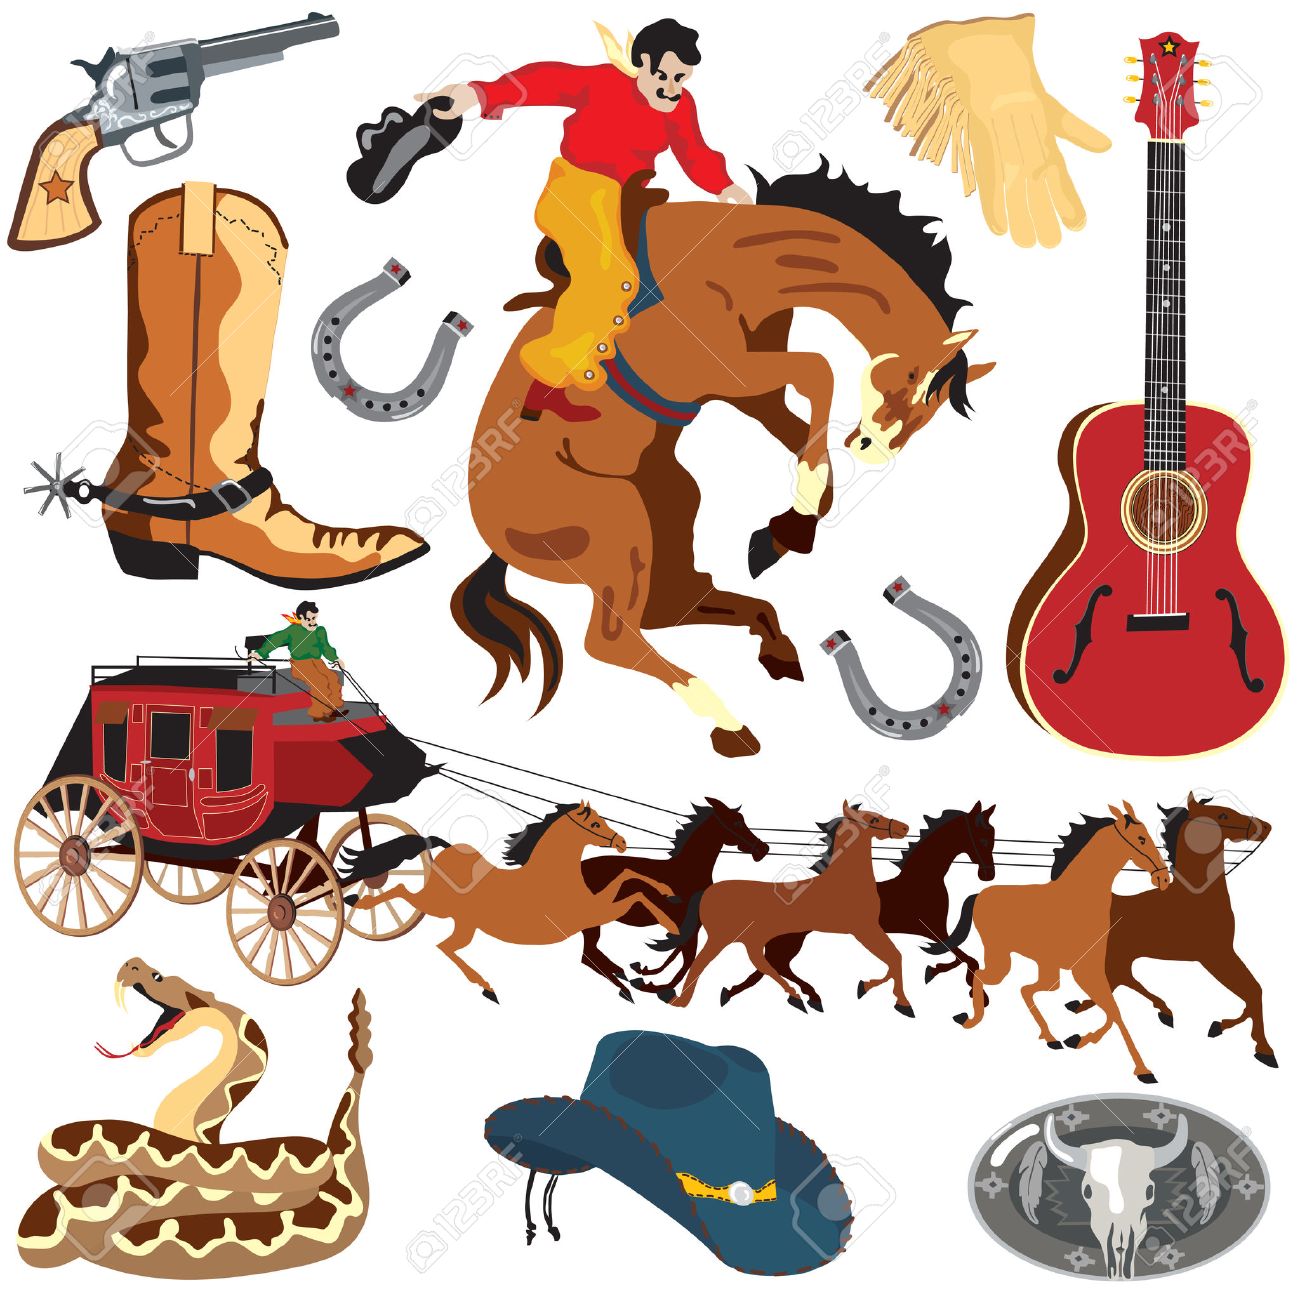 Wild West Clipart icons.